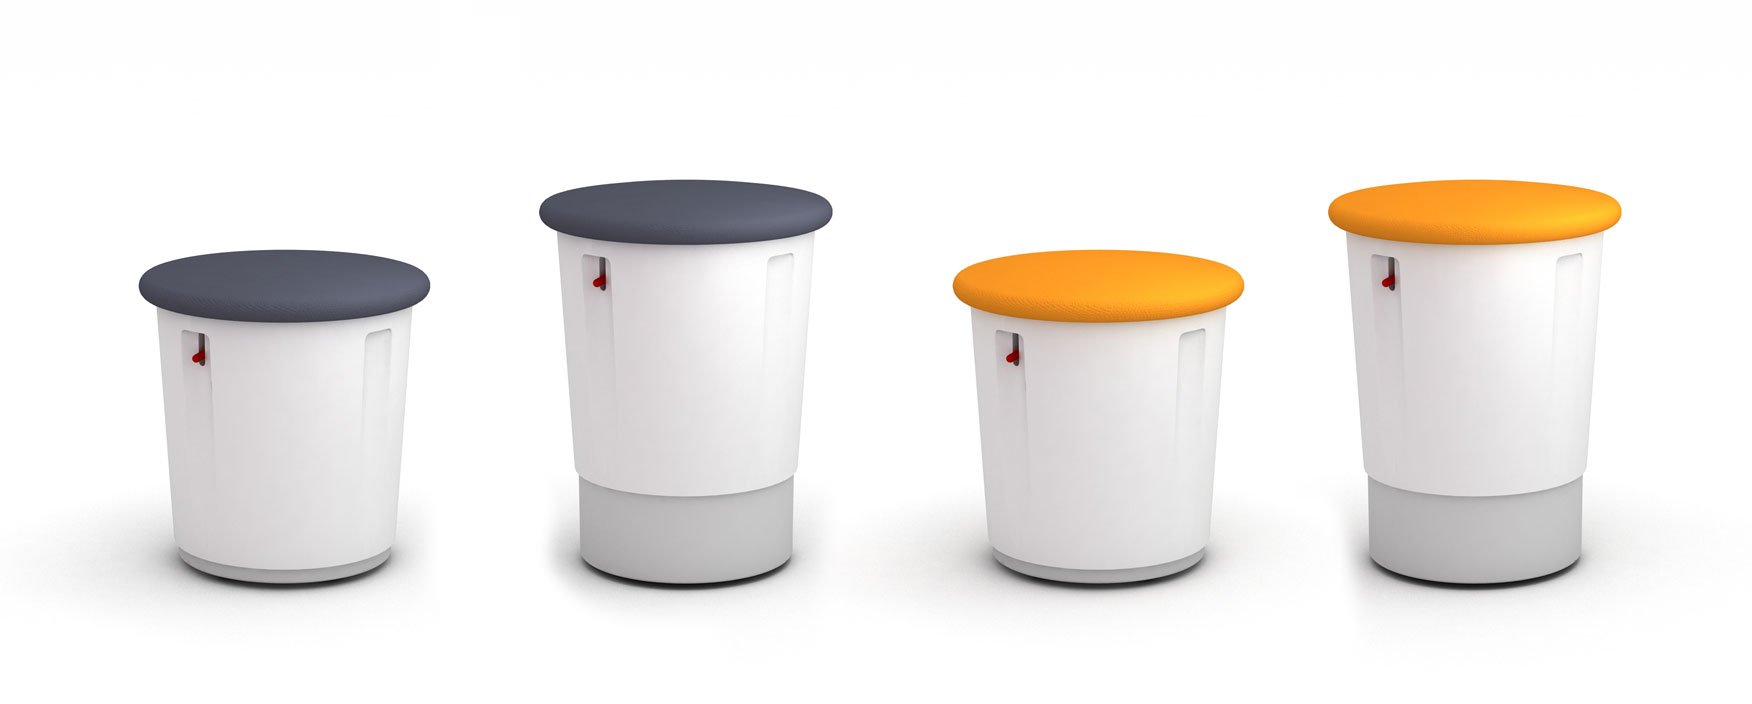 wobi stools in low and high position